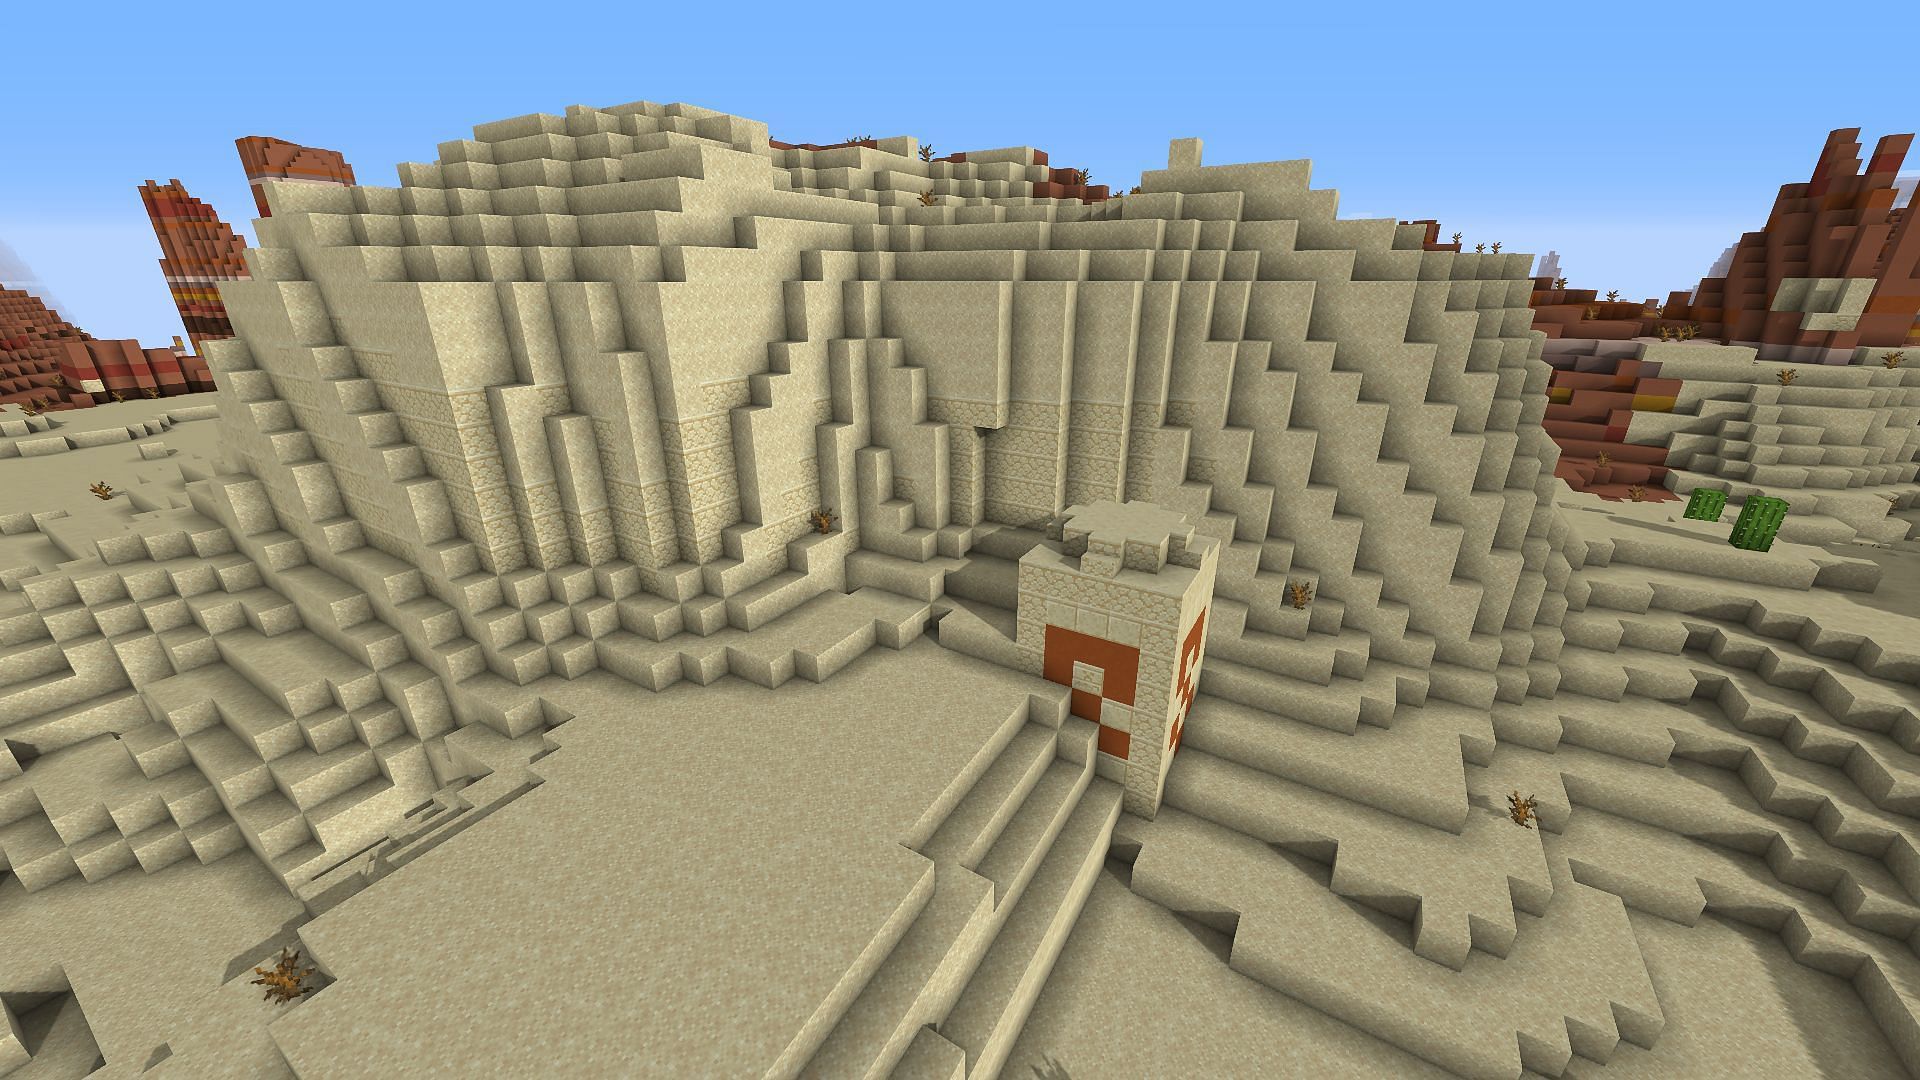 The mostly buried Desert Temple found on the seed near spawn (Image via Minecraft/Mojang)